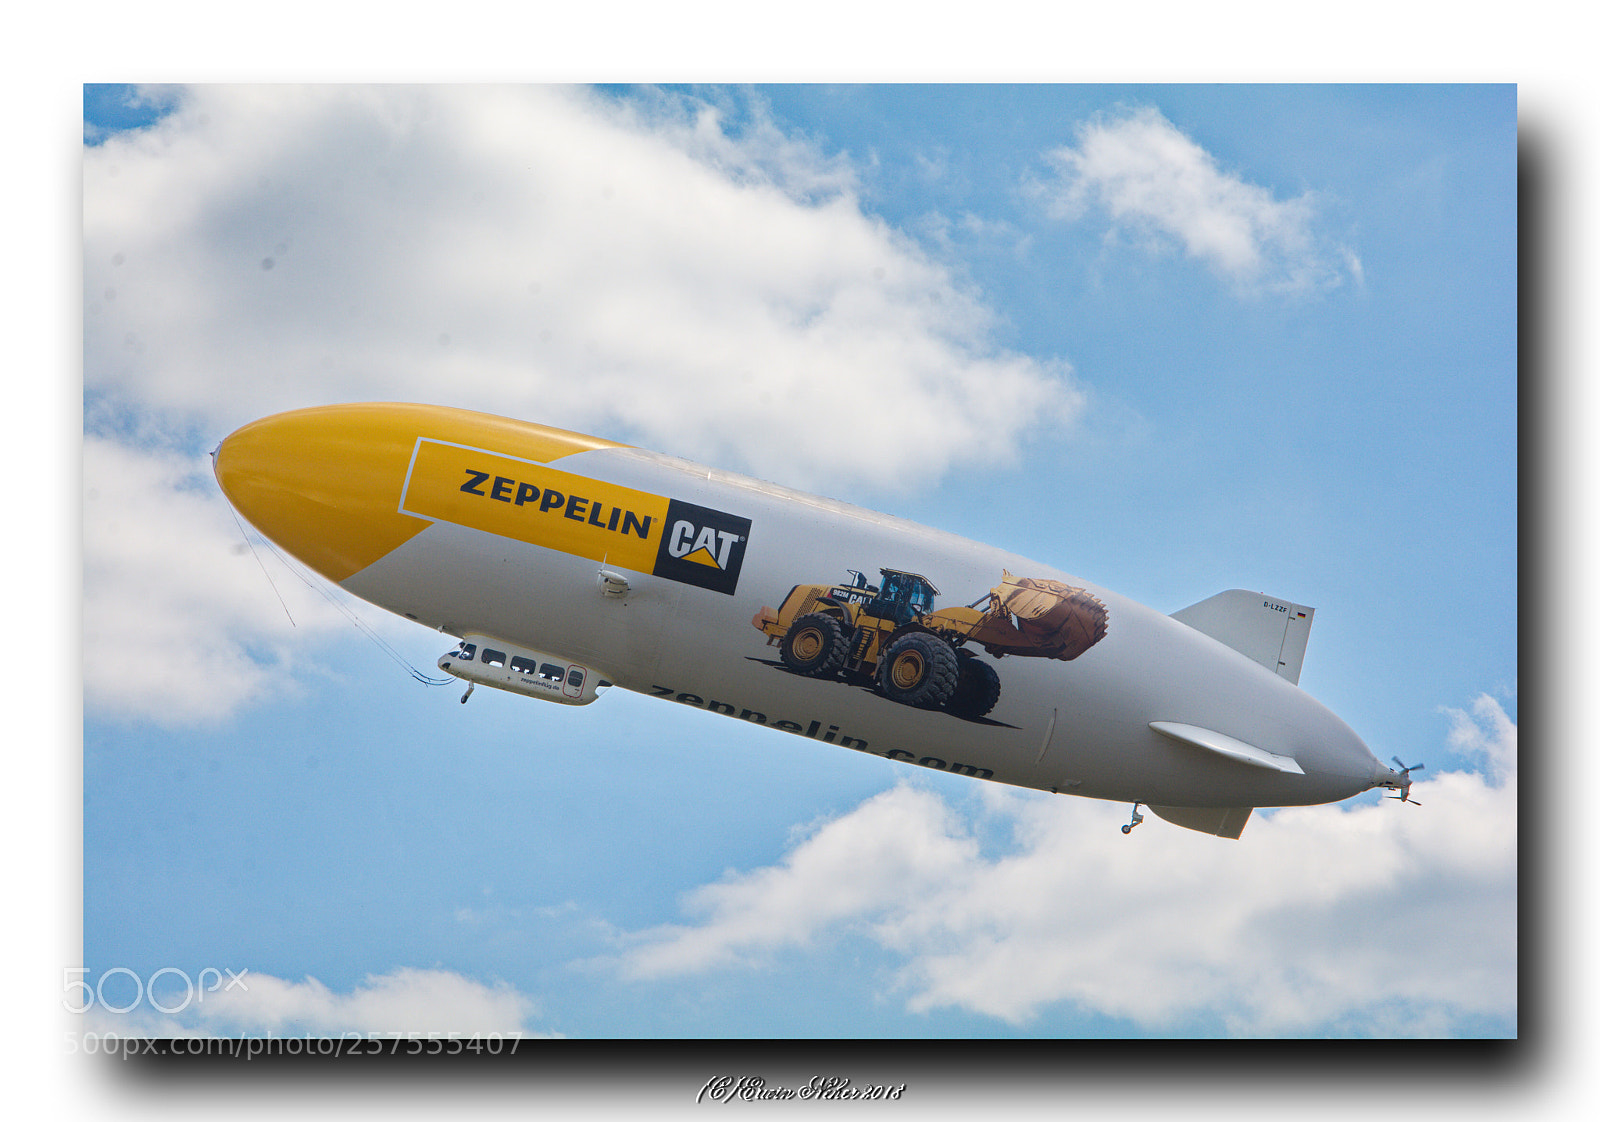 Nikon D7100 sample photo. Tuning world bodensee
zeppelin... photography